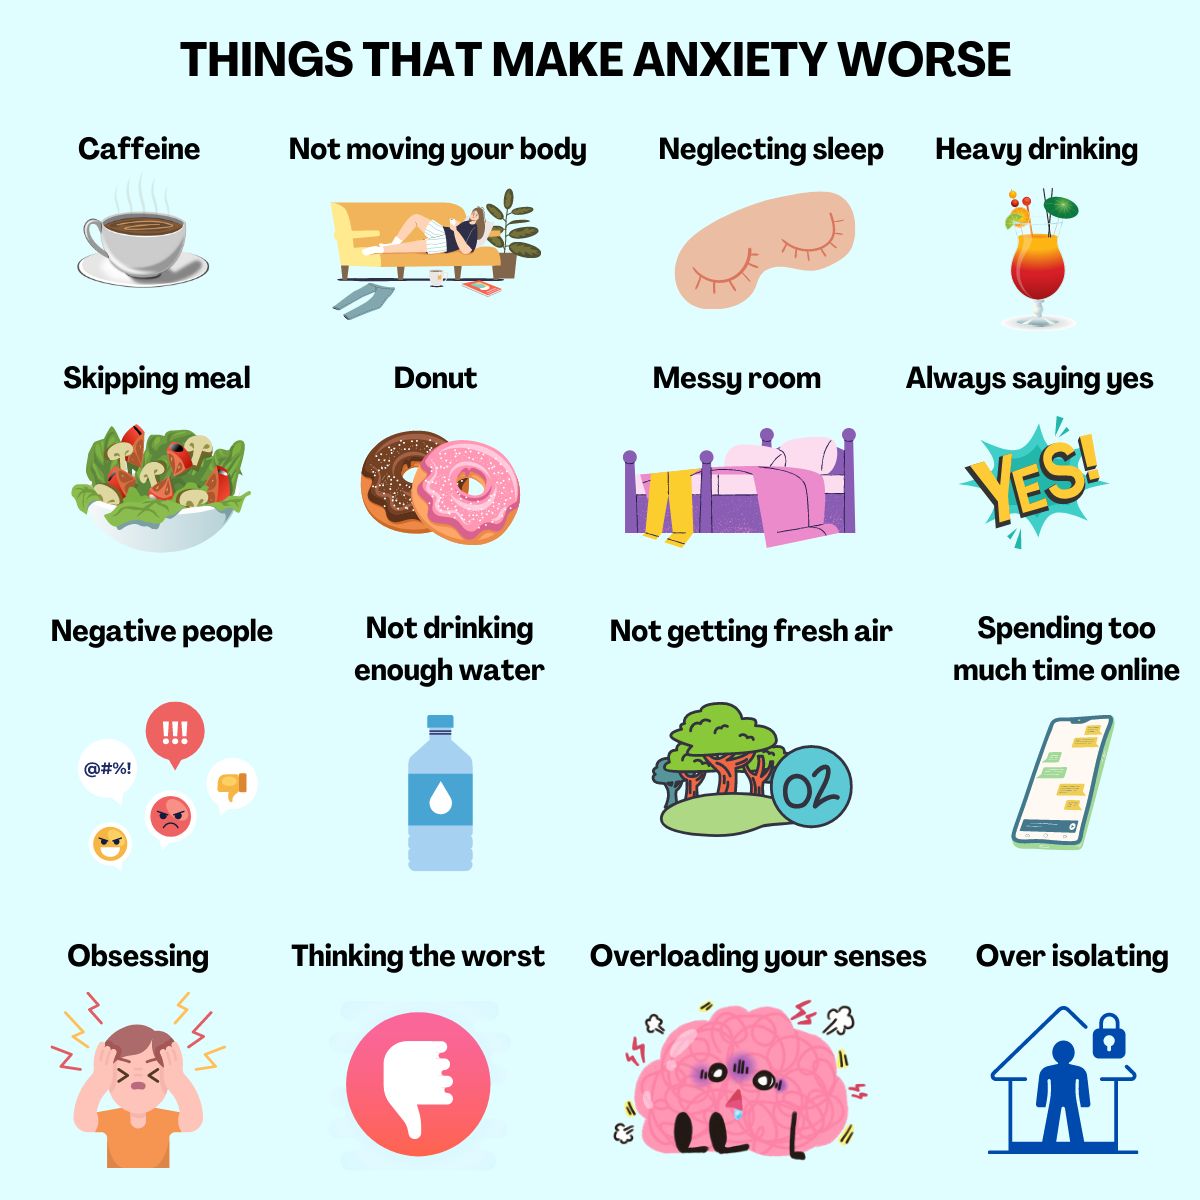 Things that Make Anxiety Worse